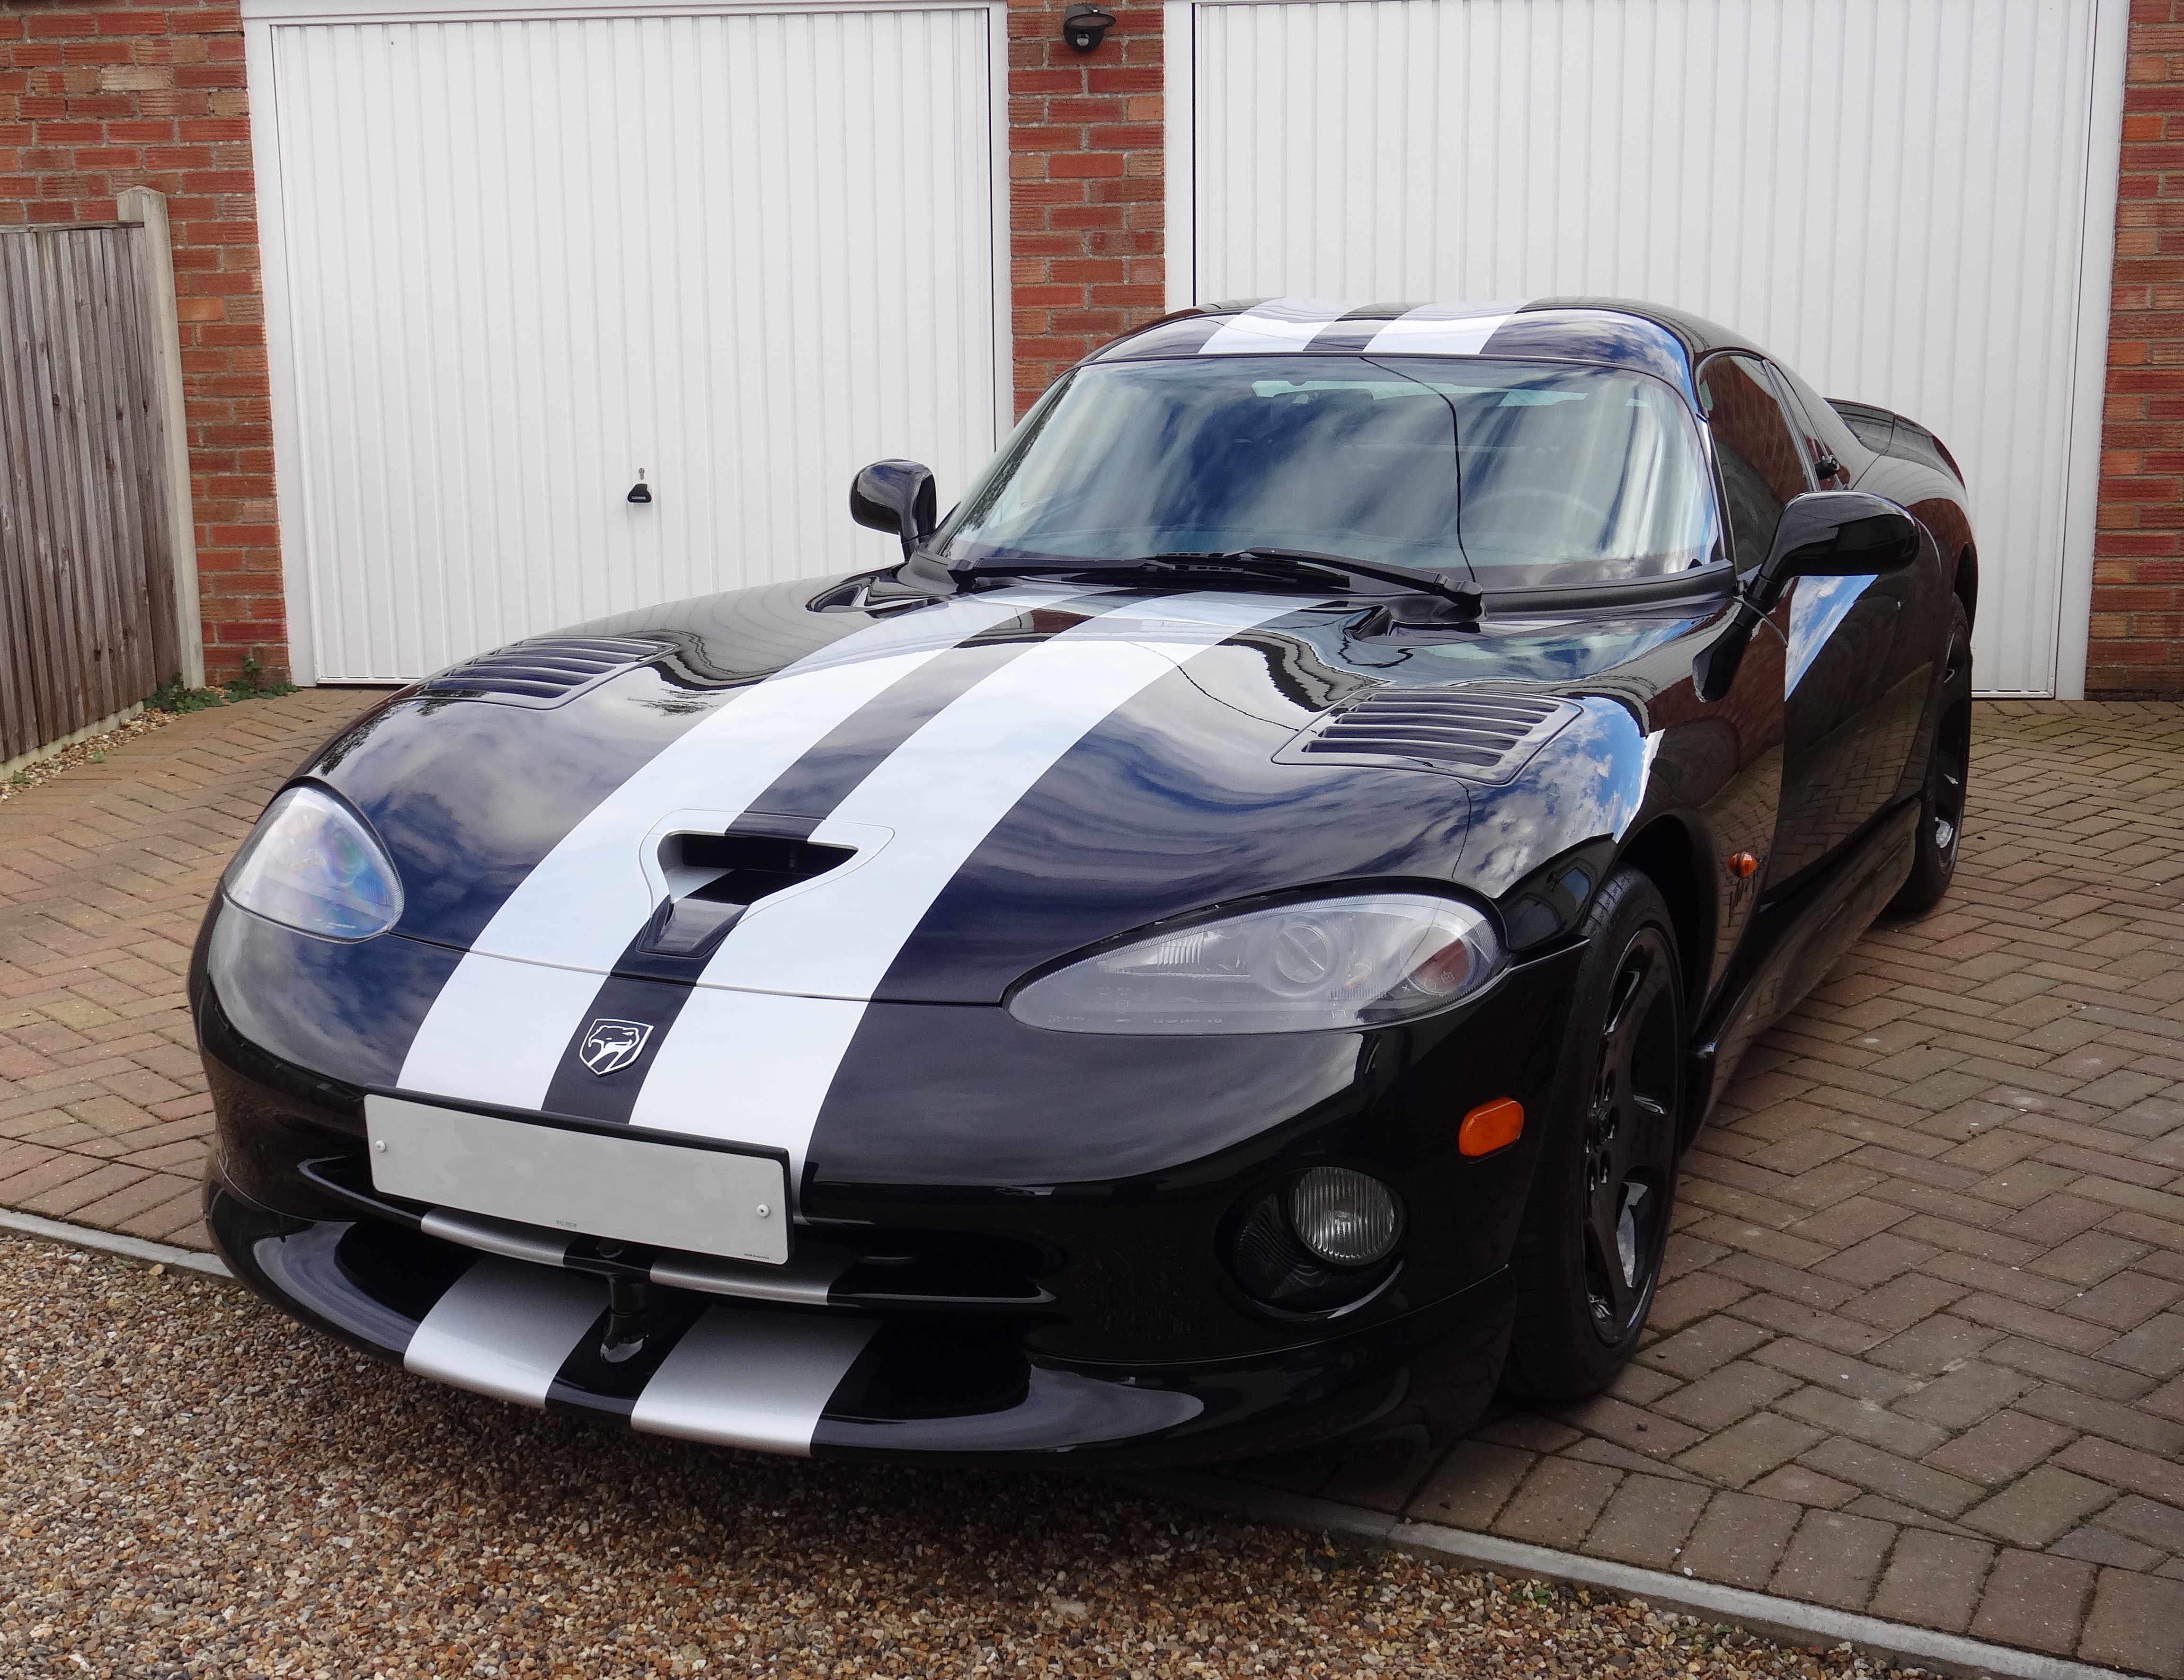 Does the Viper still excite? - Page 1 - Vipers - PistonHeads